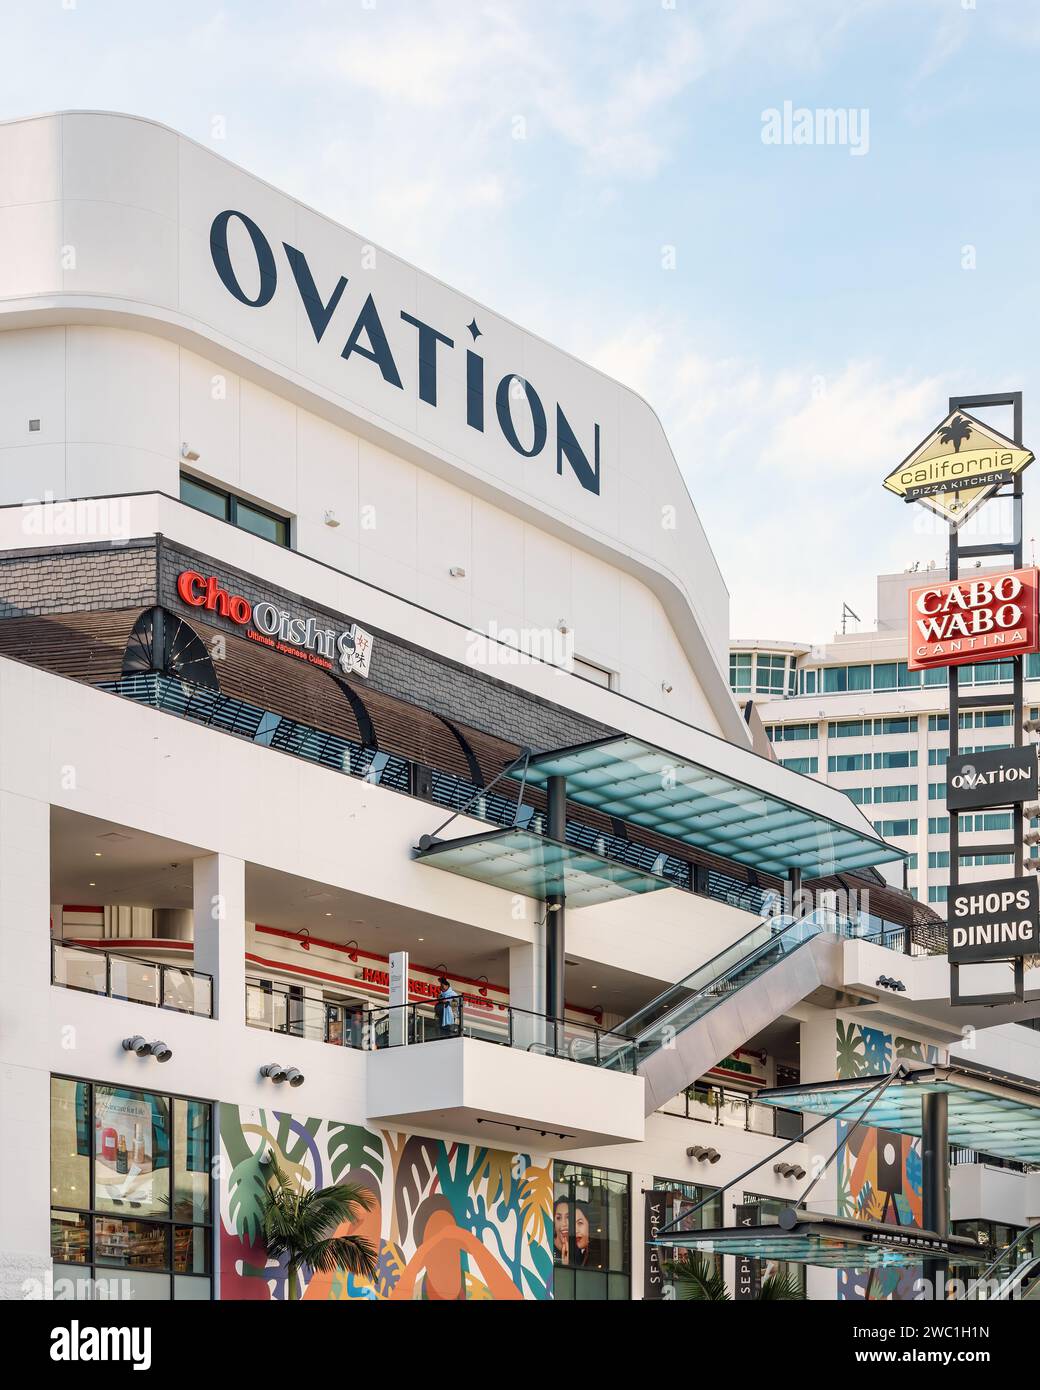 Ovation Hollywood. Shopping center and entertainment complex located on Hollywood Boulevard in Hollywood, Los Angeles, California, United States. Stock Photo